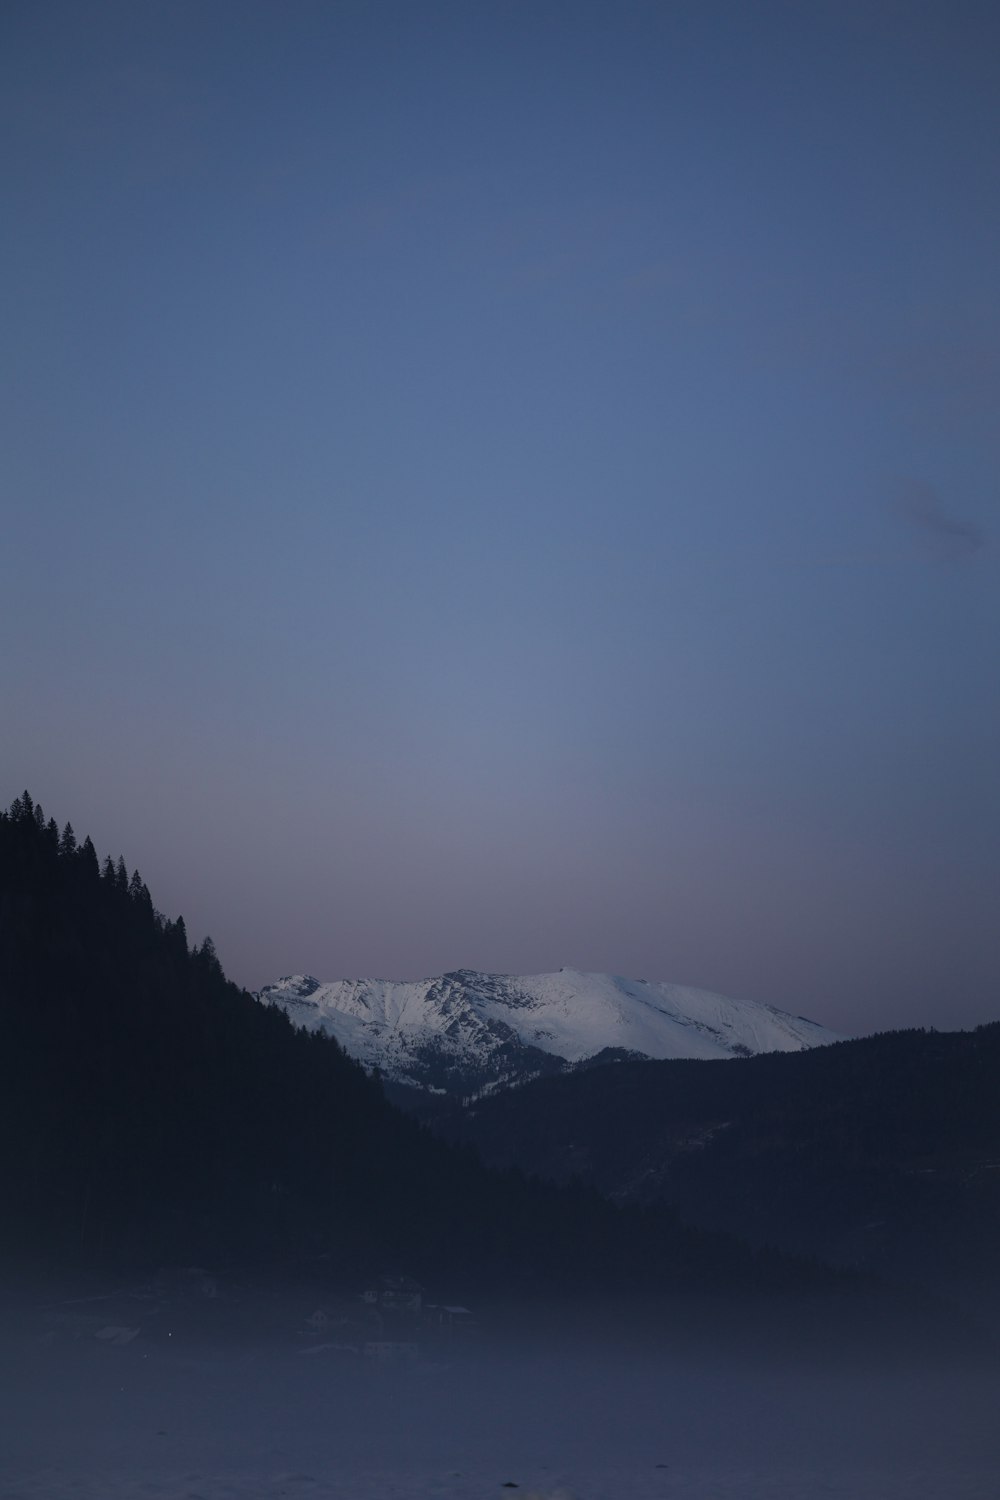 a view of a snowy mountain range at dusk